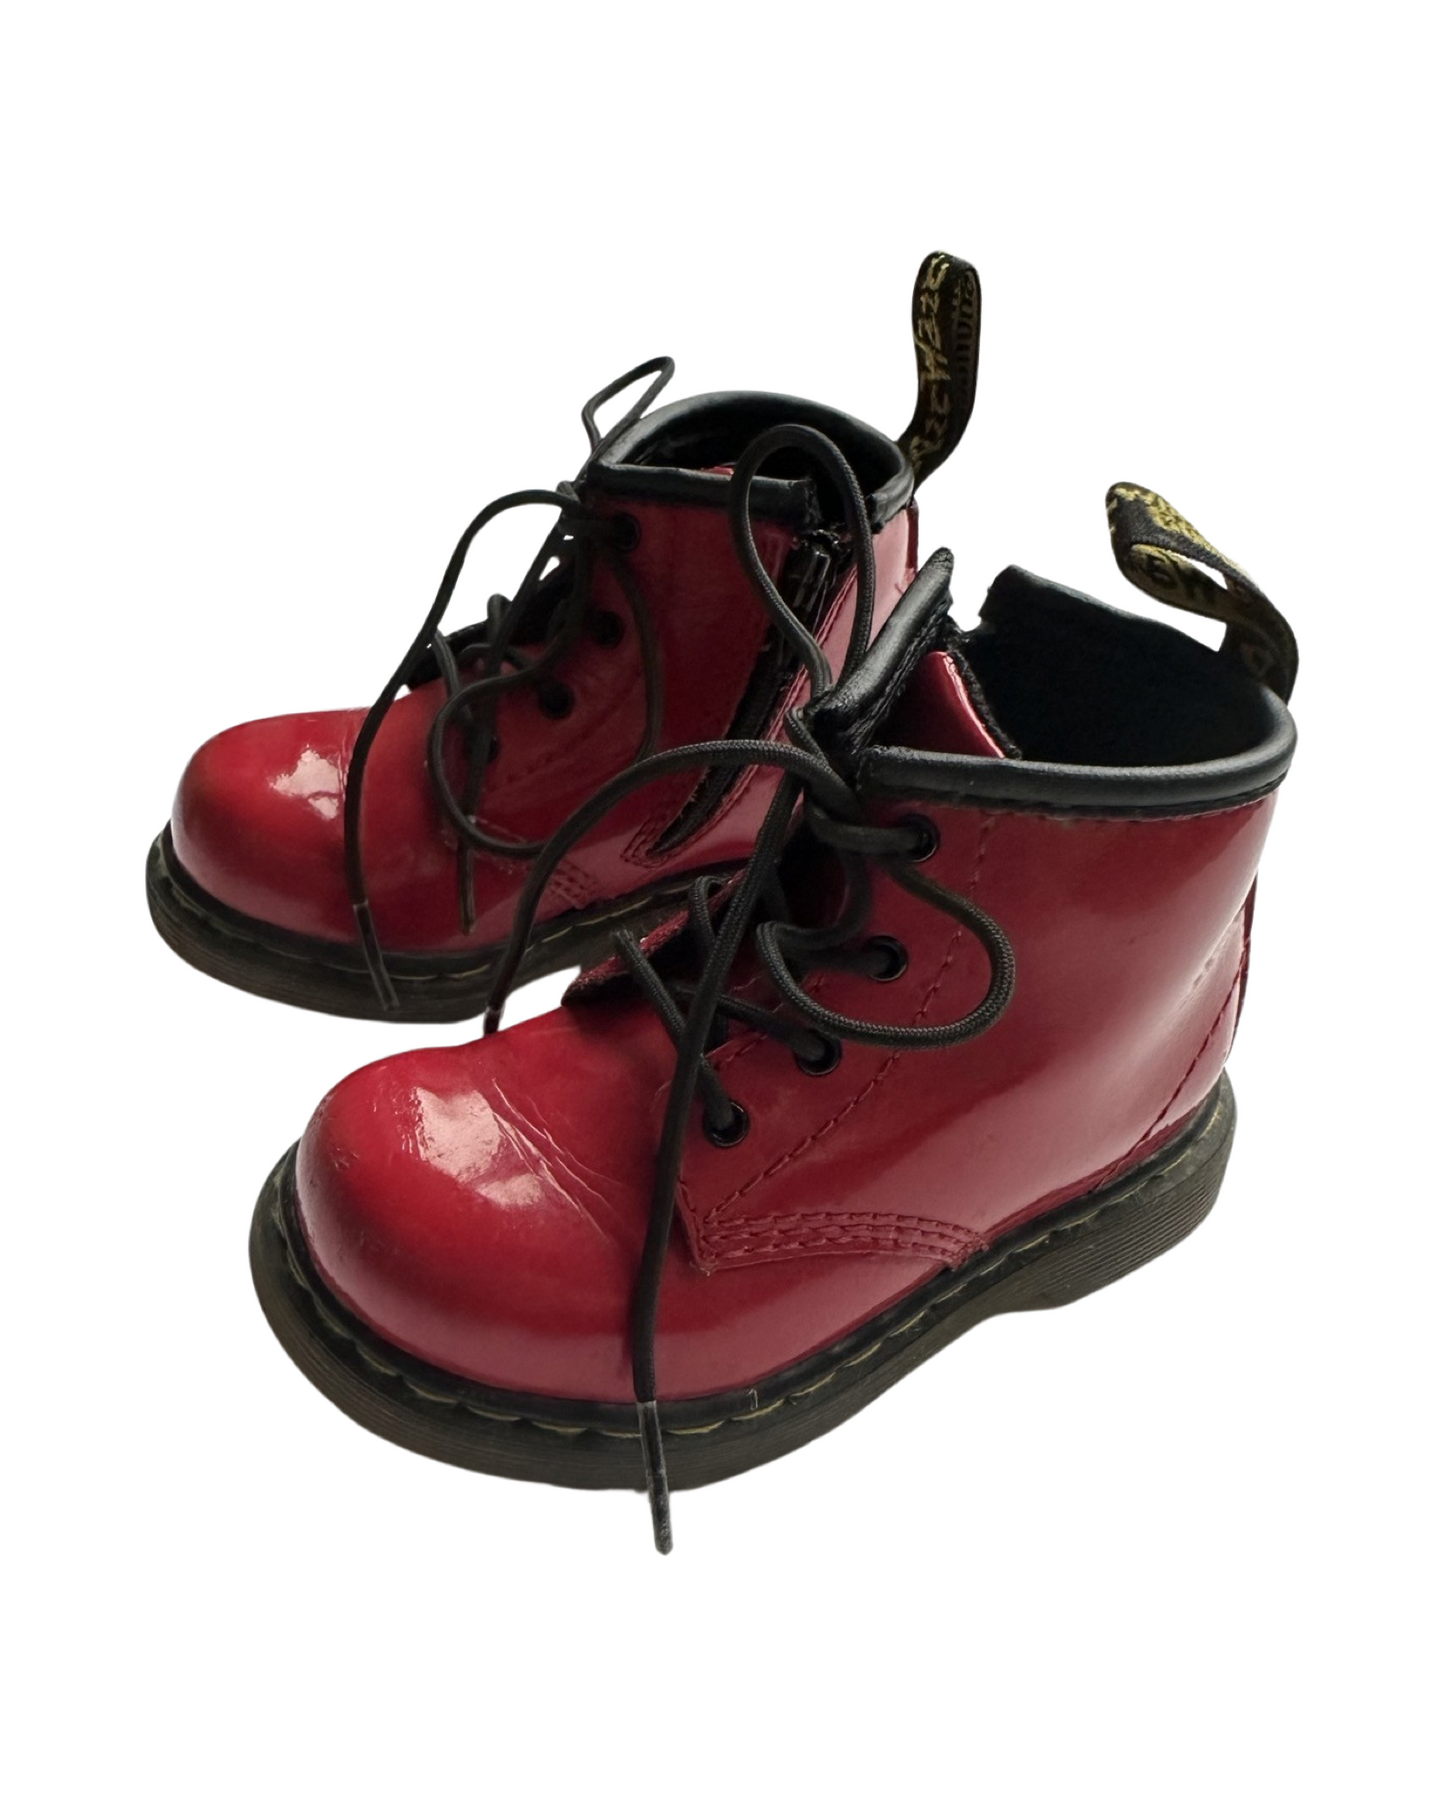 Dr Marten 1460 toddler boot in red (size UK5/EU21.5)